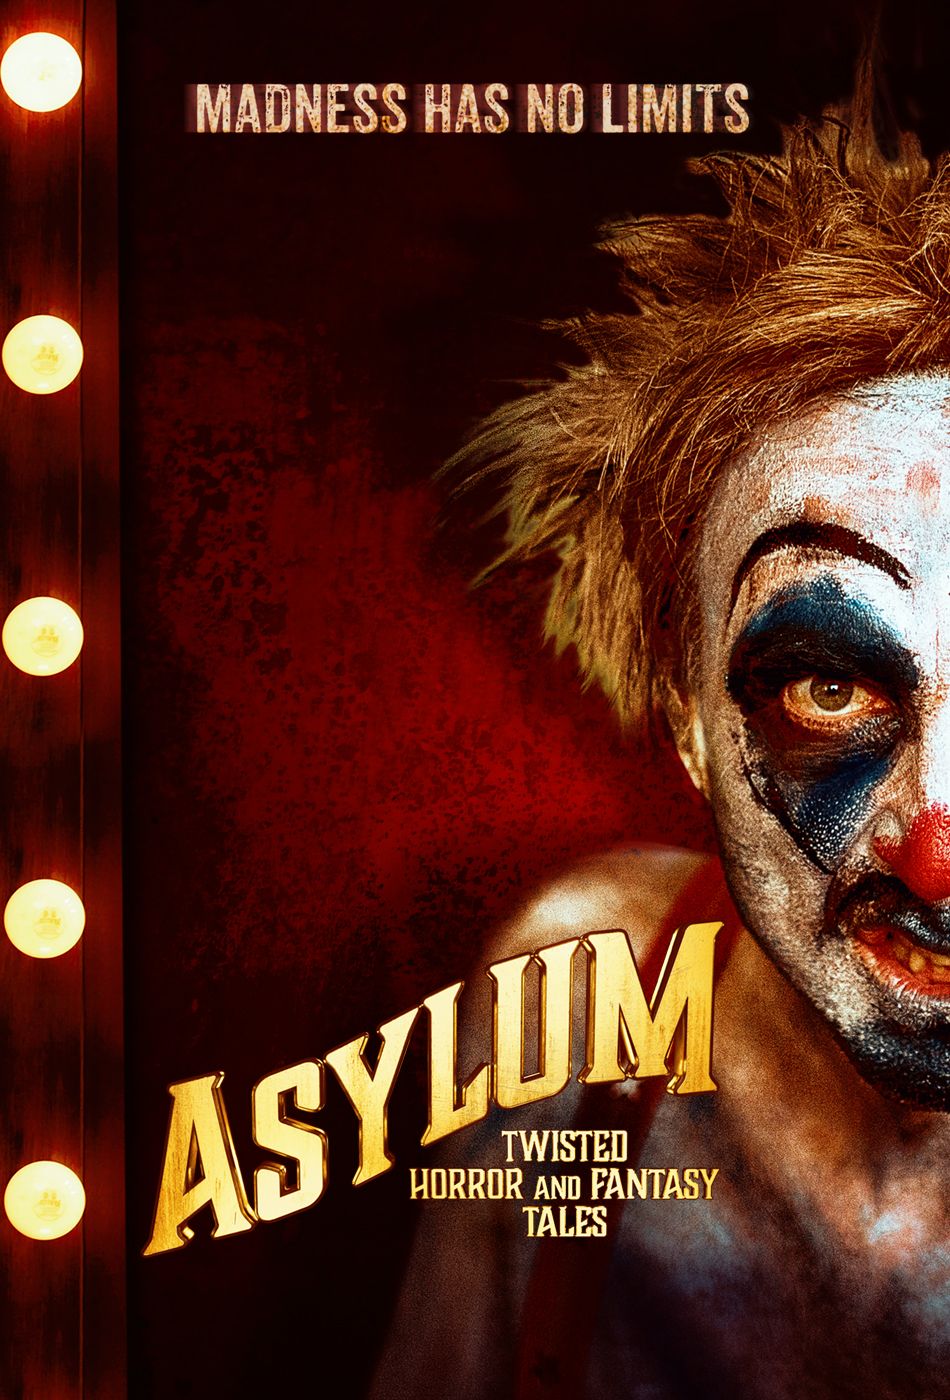 Asylum: Twisted Horror and Fantasy Tales (2020) Hindi Dubbed BluRay download full movie